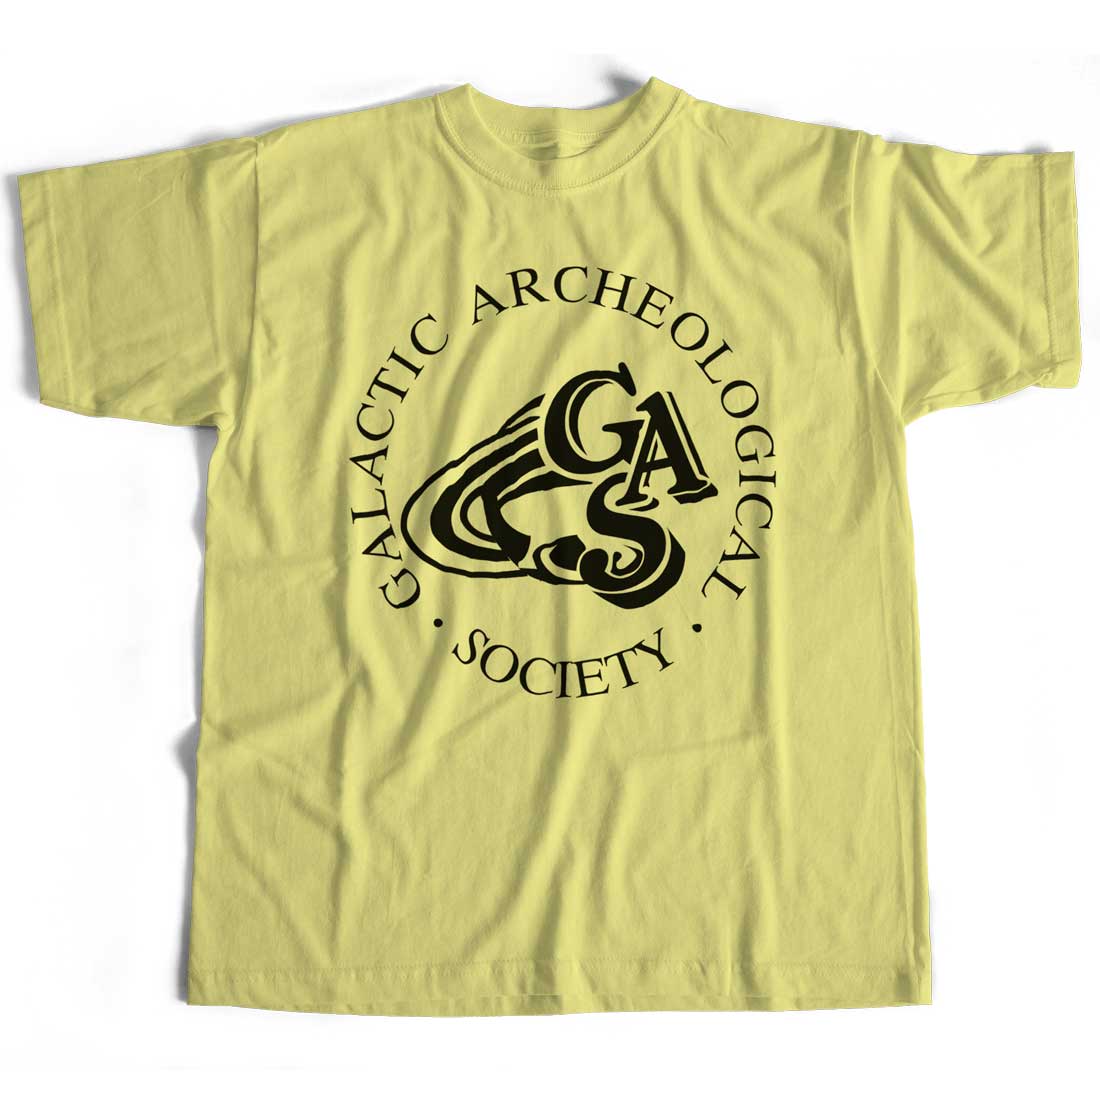 As Worn On The Adventure Game T shirt - Galactic Archeological Society Cult 80's TV